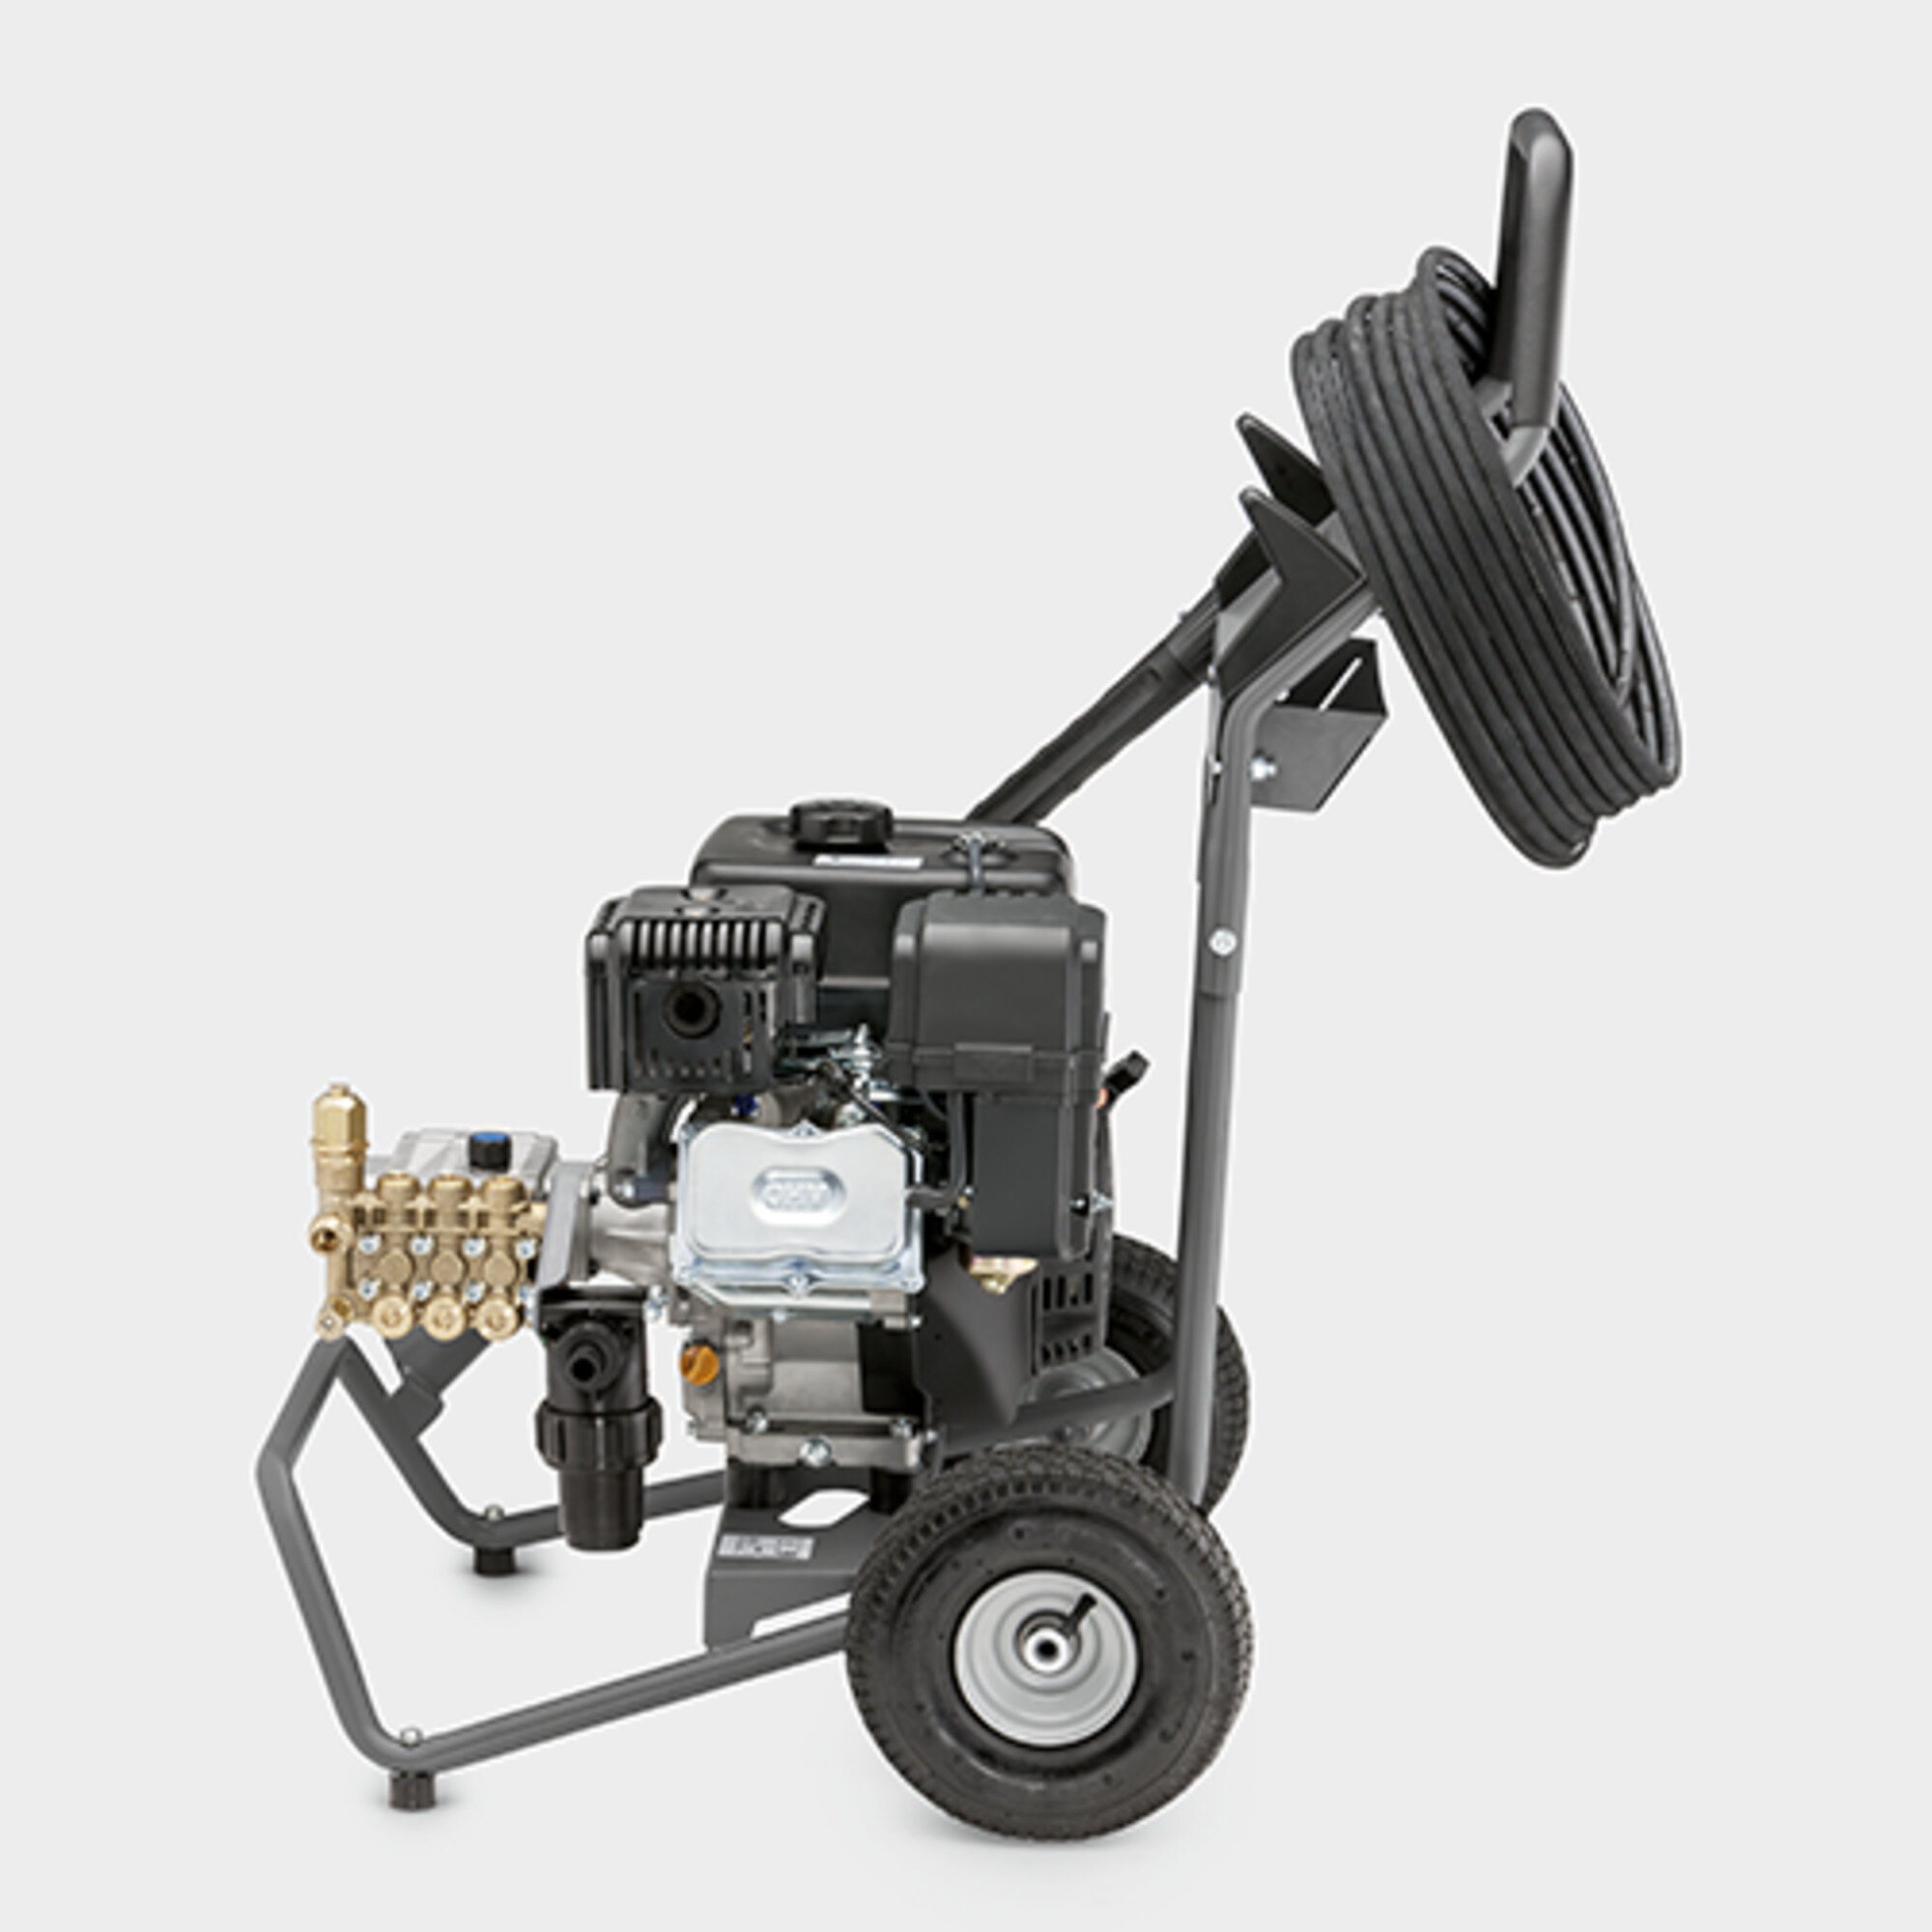 High pressure washer HD 7/20 G Classic: Outstanding mobility